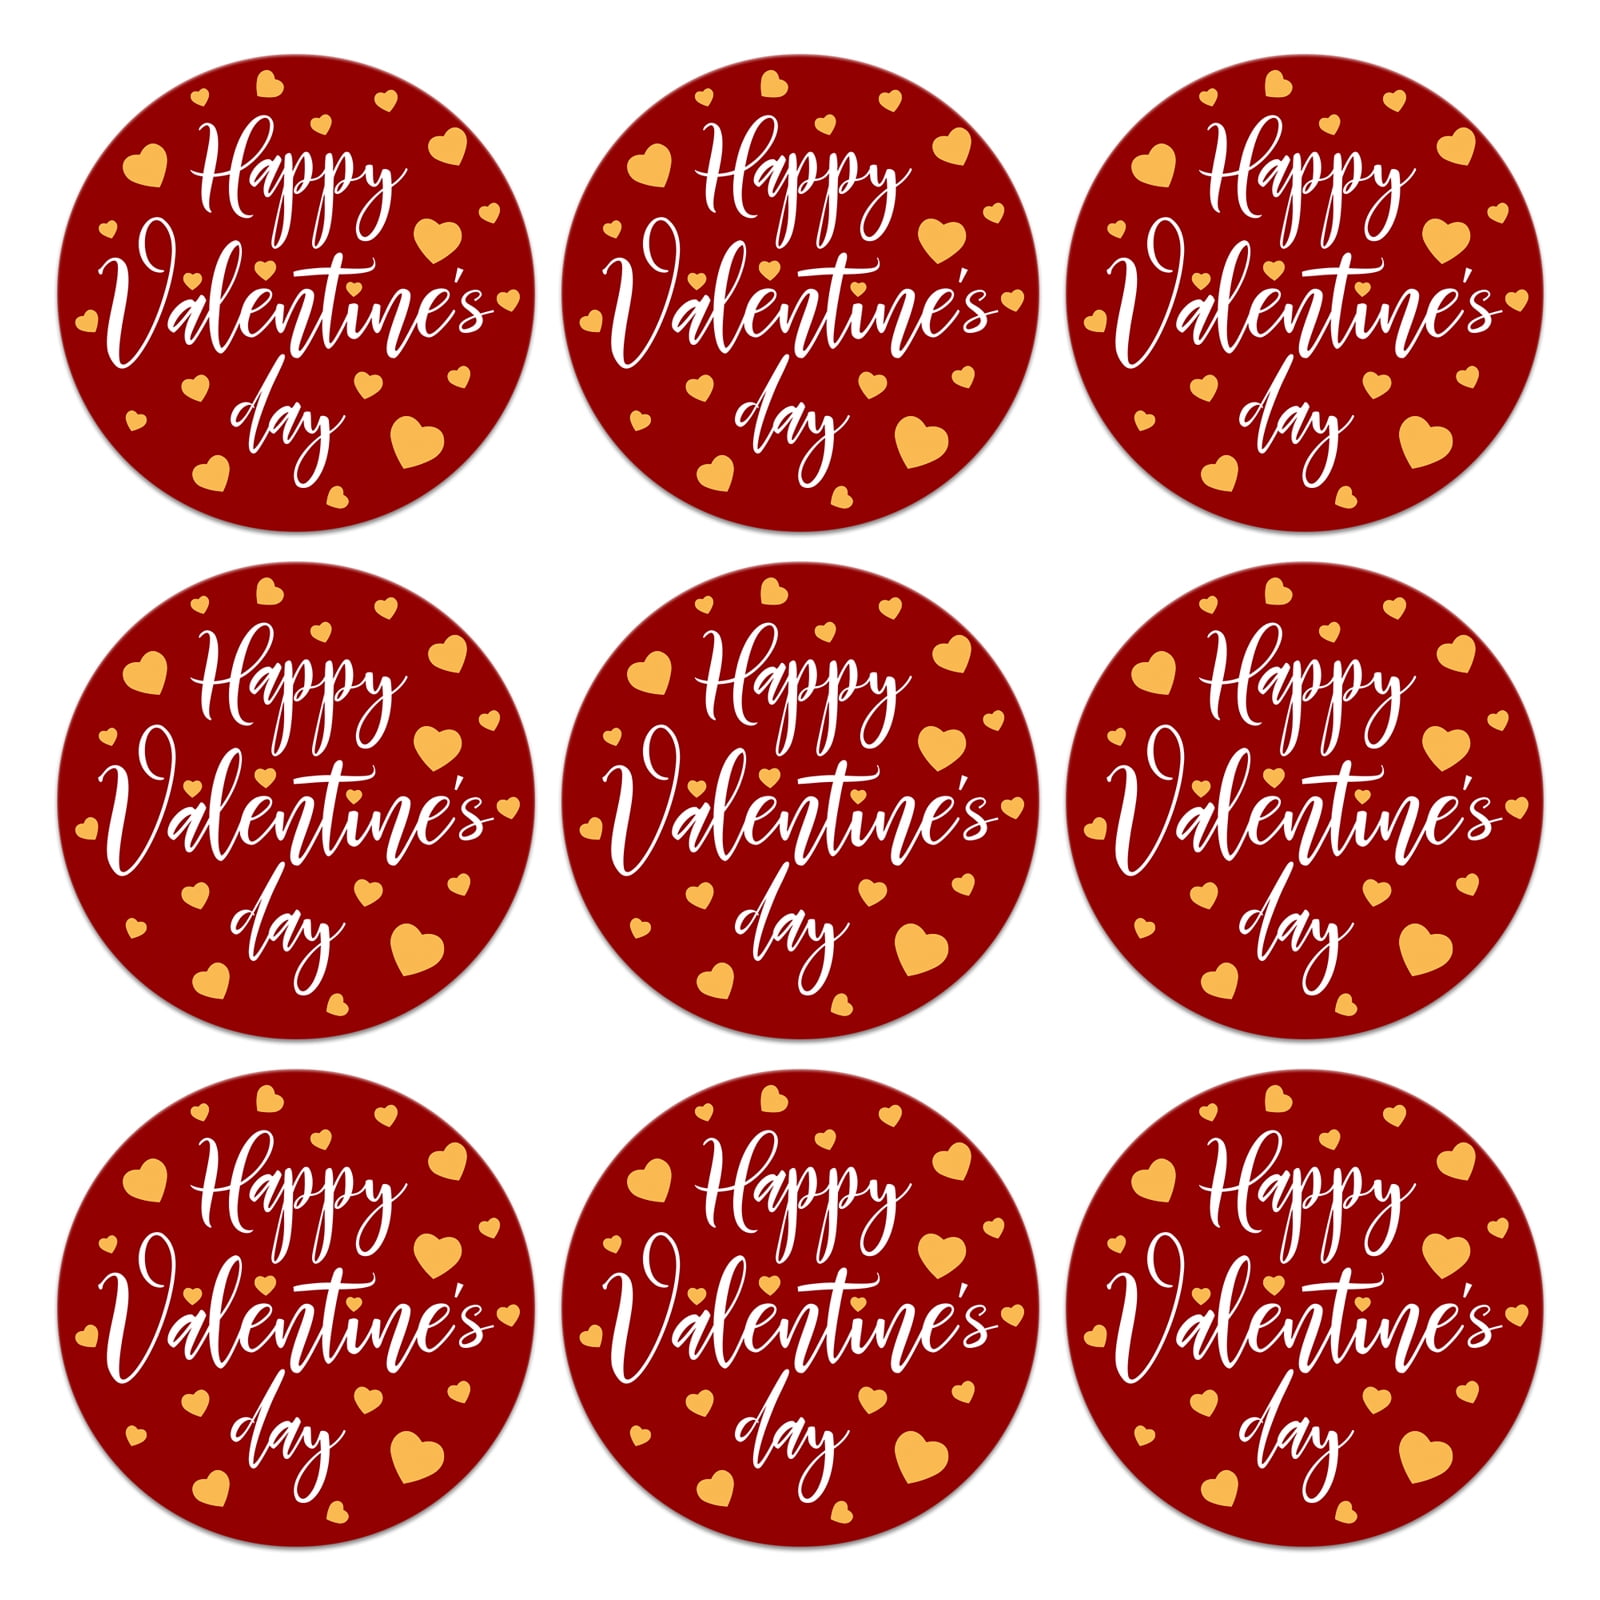 Princess Valentine Favors Personalized Treat Bags and Stickers Valentines Day Set of 20 